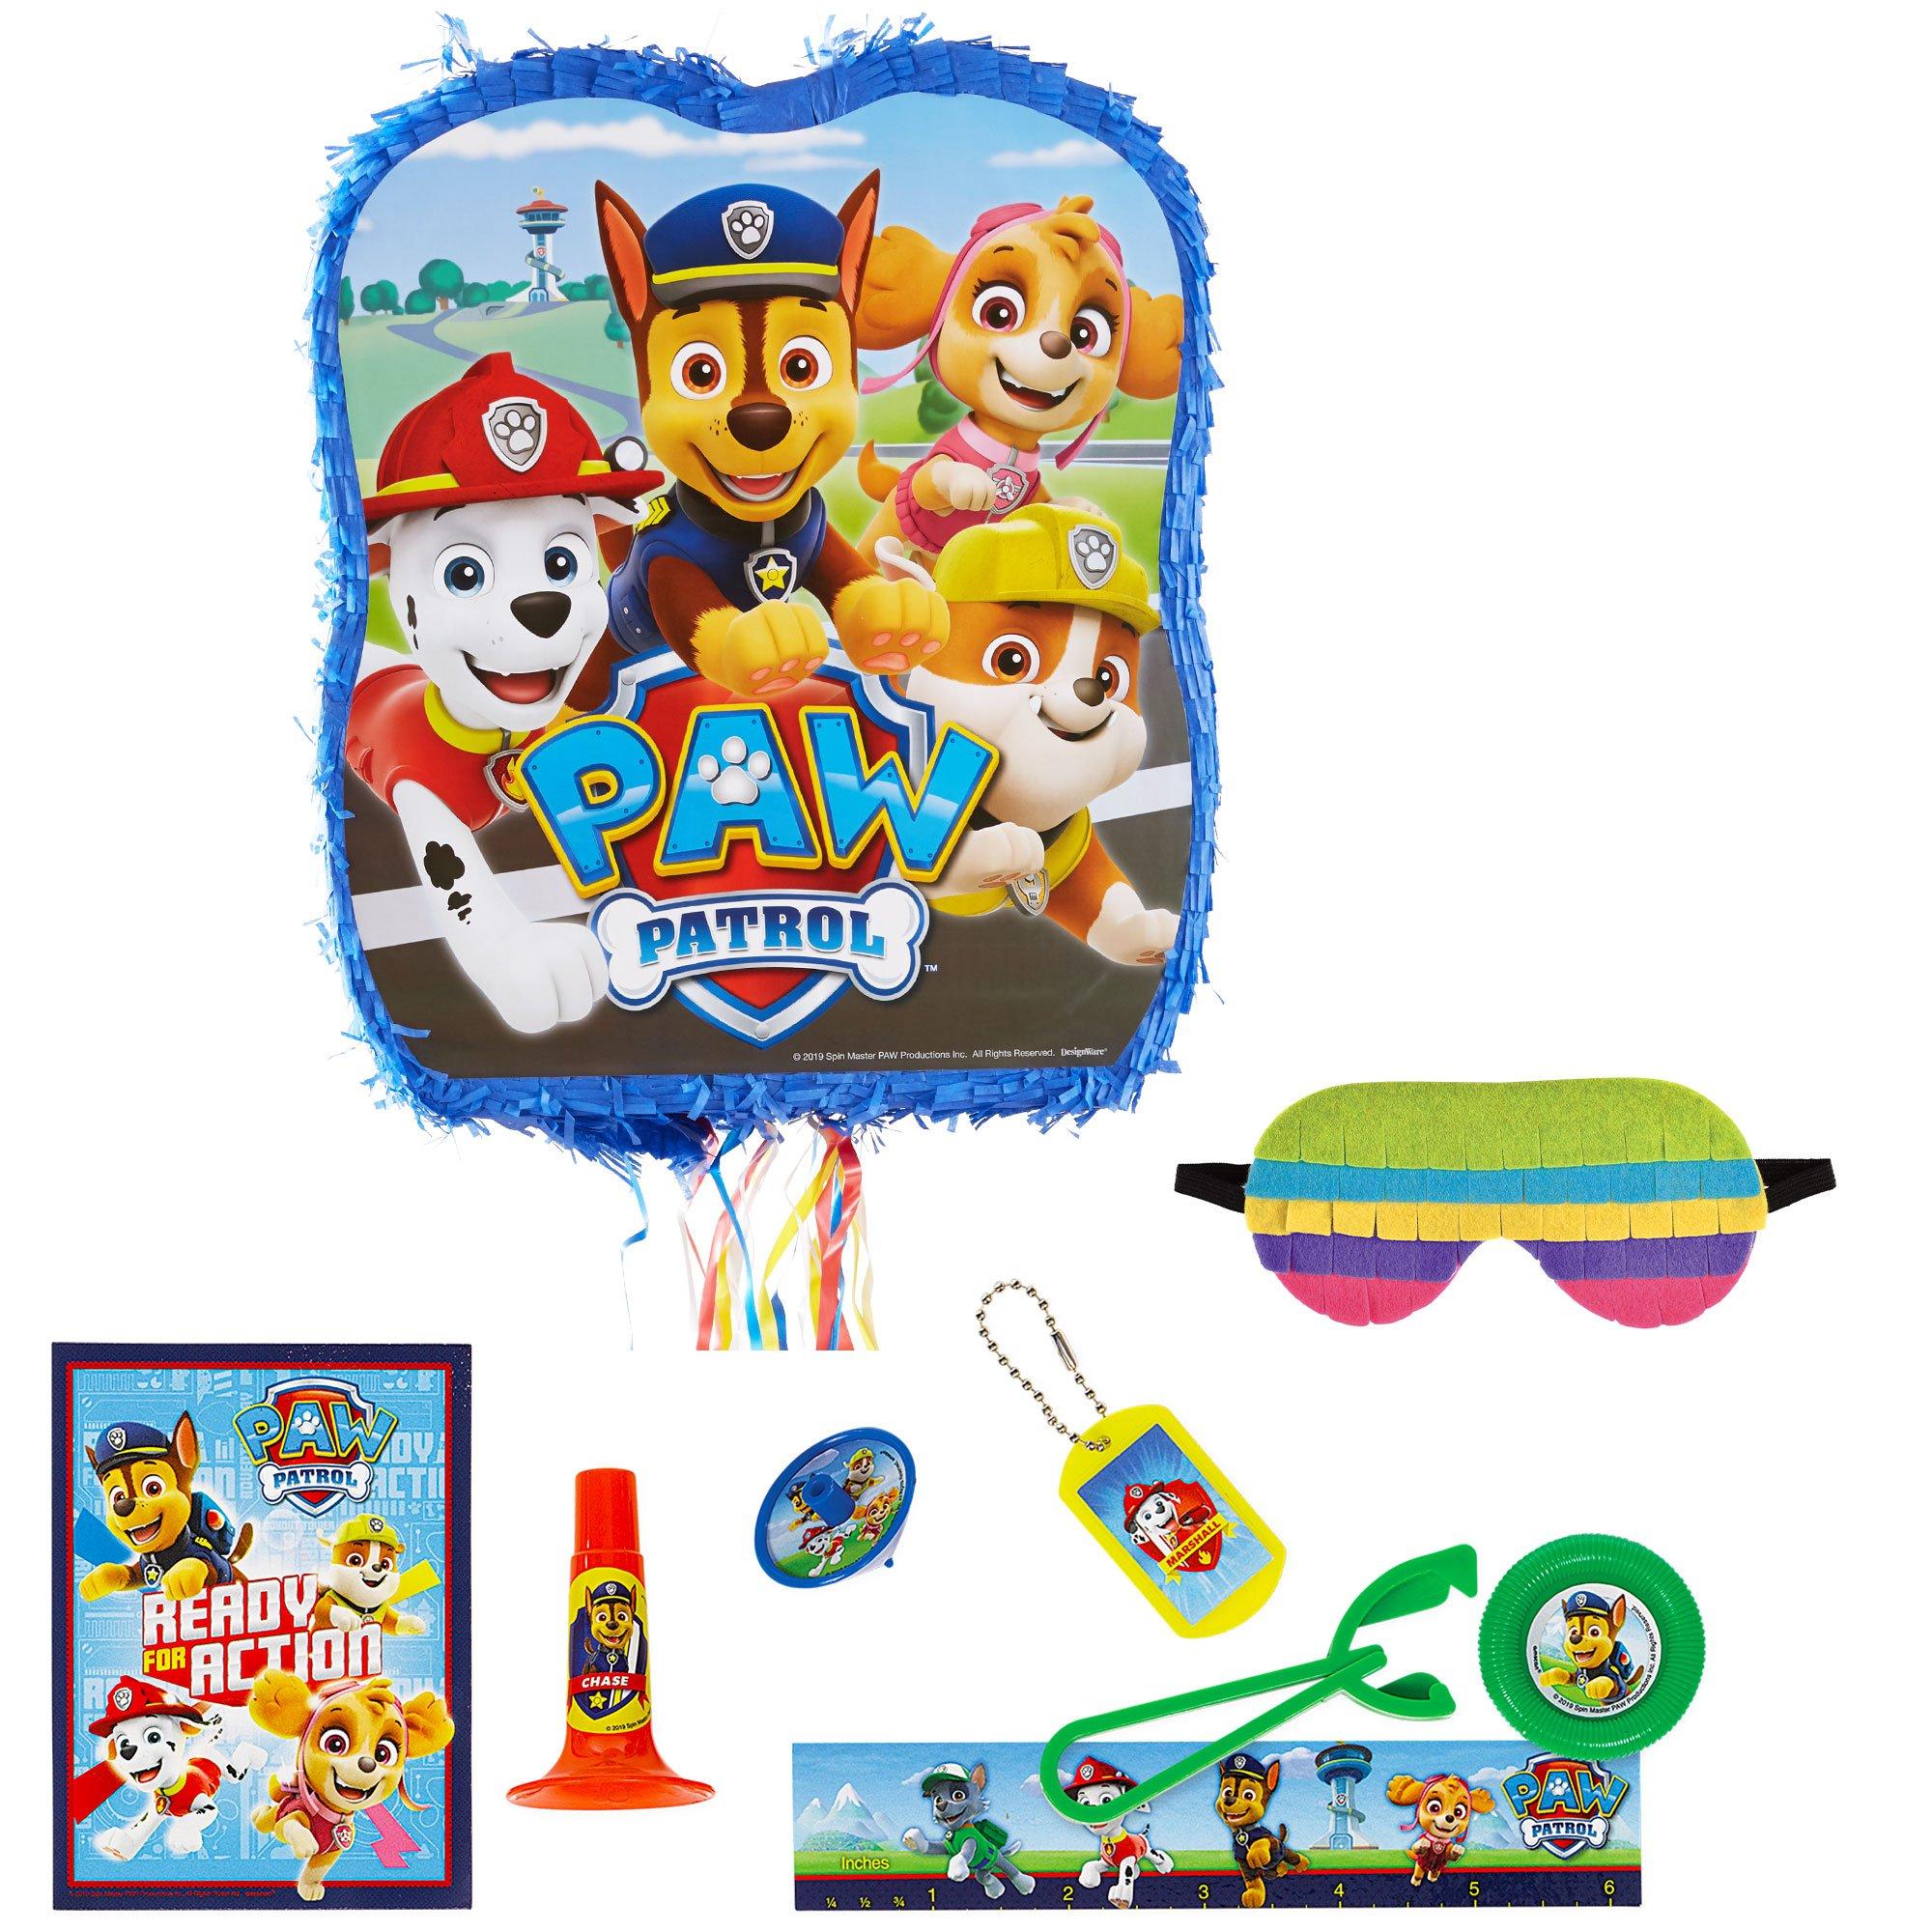 Paw Patrol Piñata - Fun and Excitement for Your Child's Birthday Party